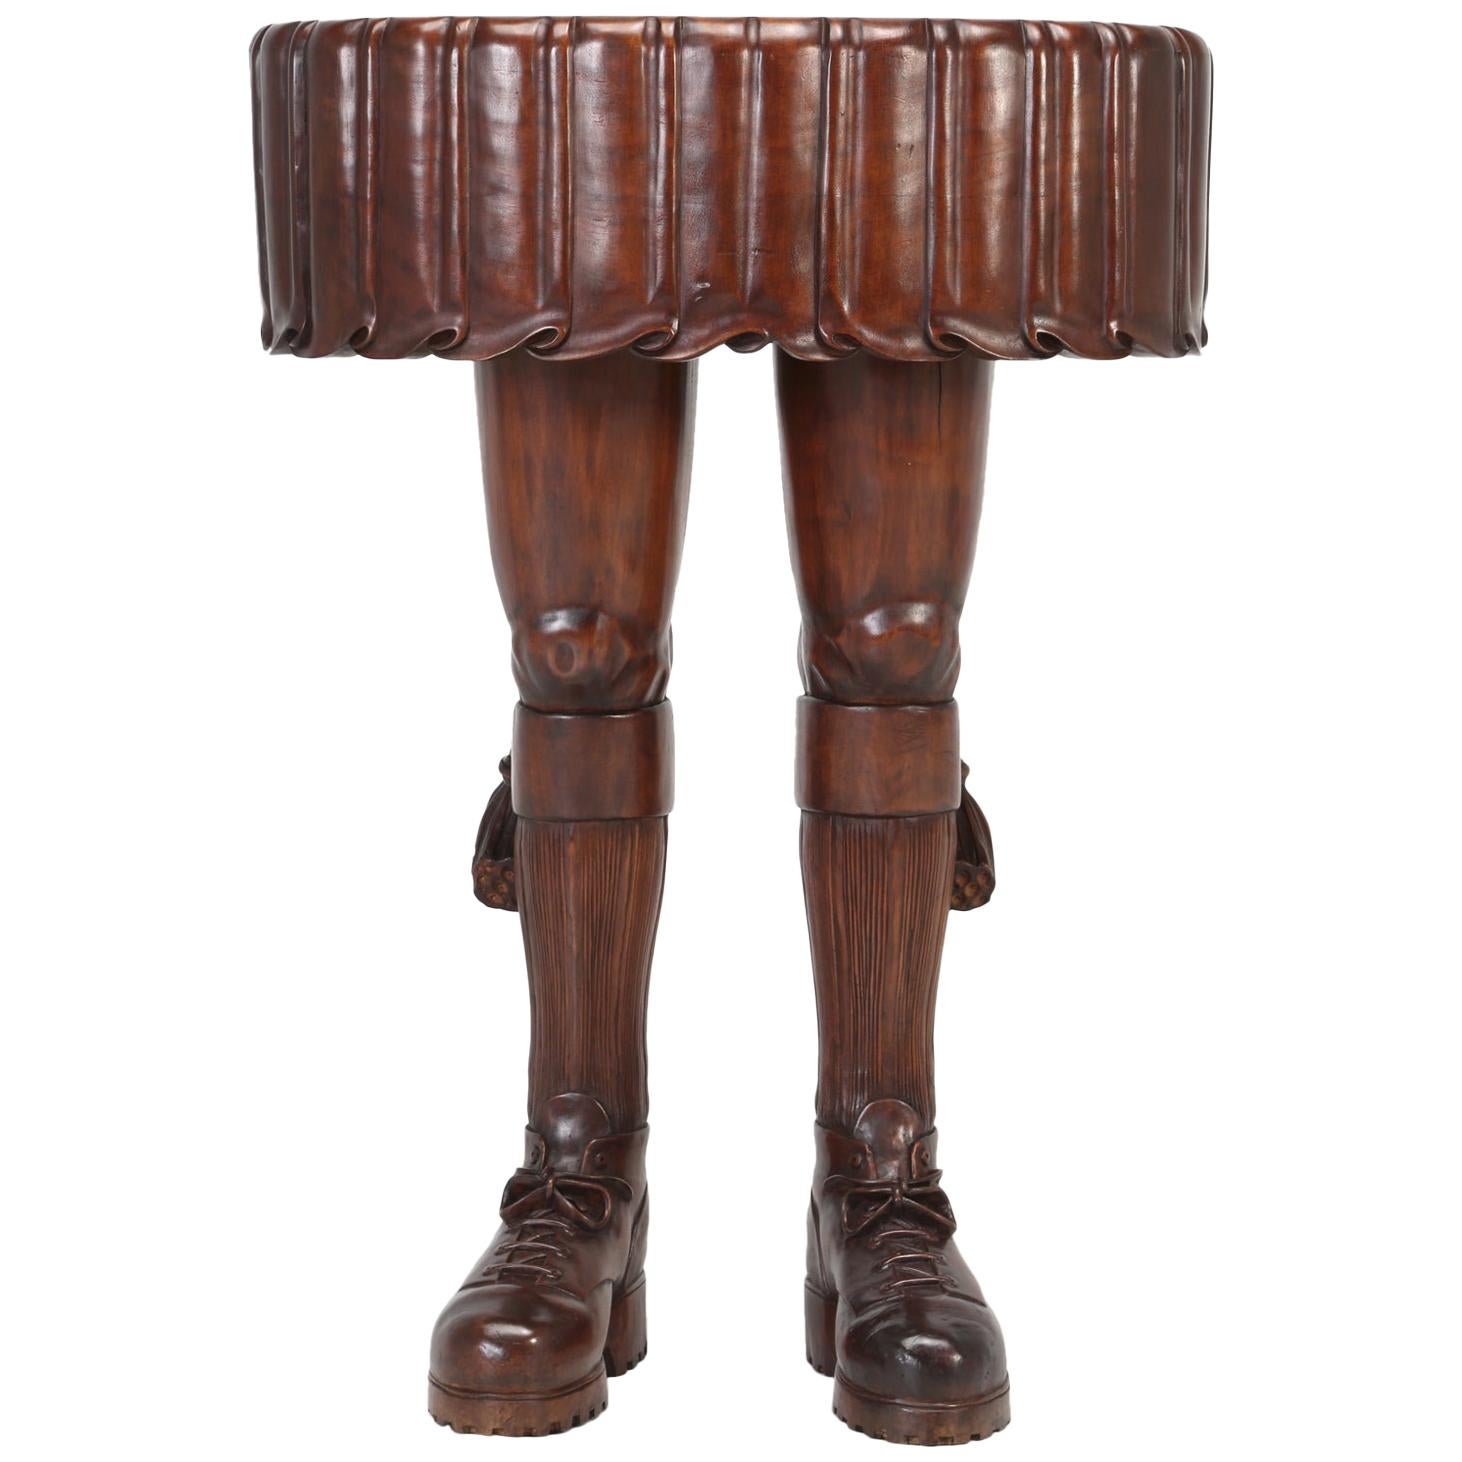 French Solid Mahogany Whimsical Side Table or Sculpture